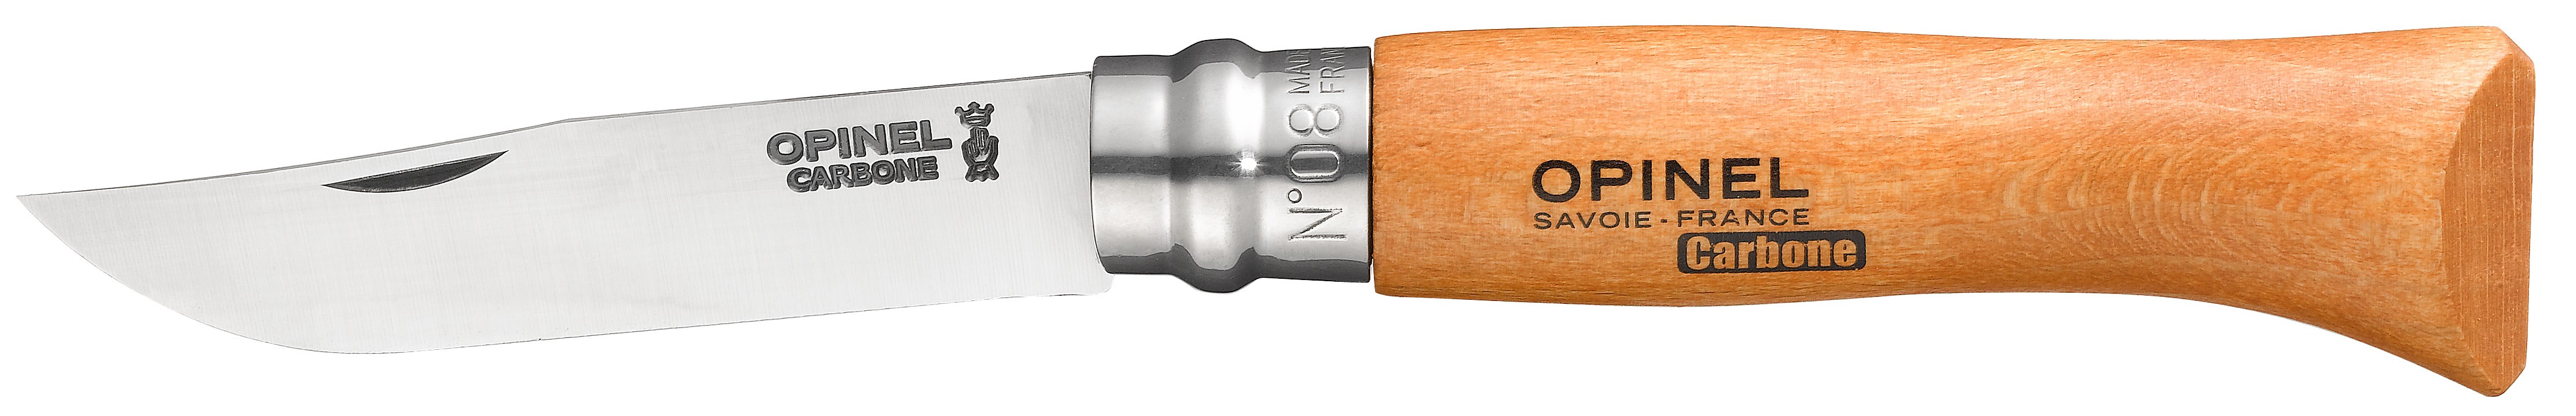 Couteau N°8 Carbone - OPINEL